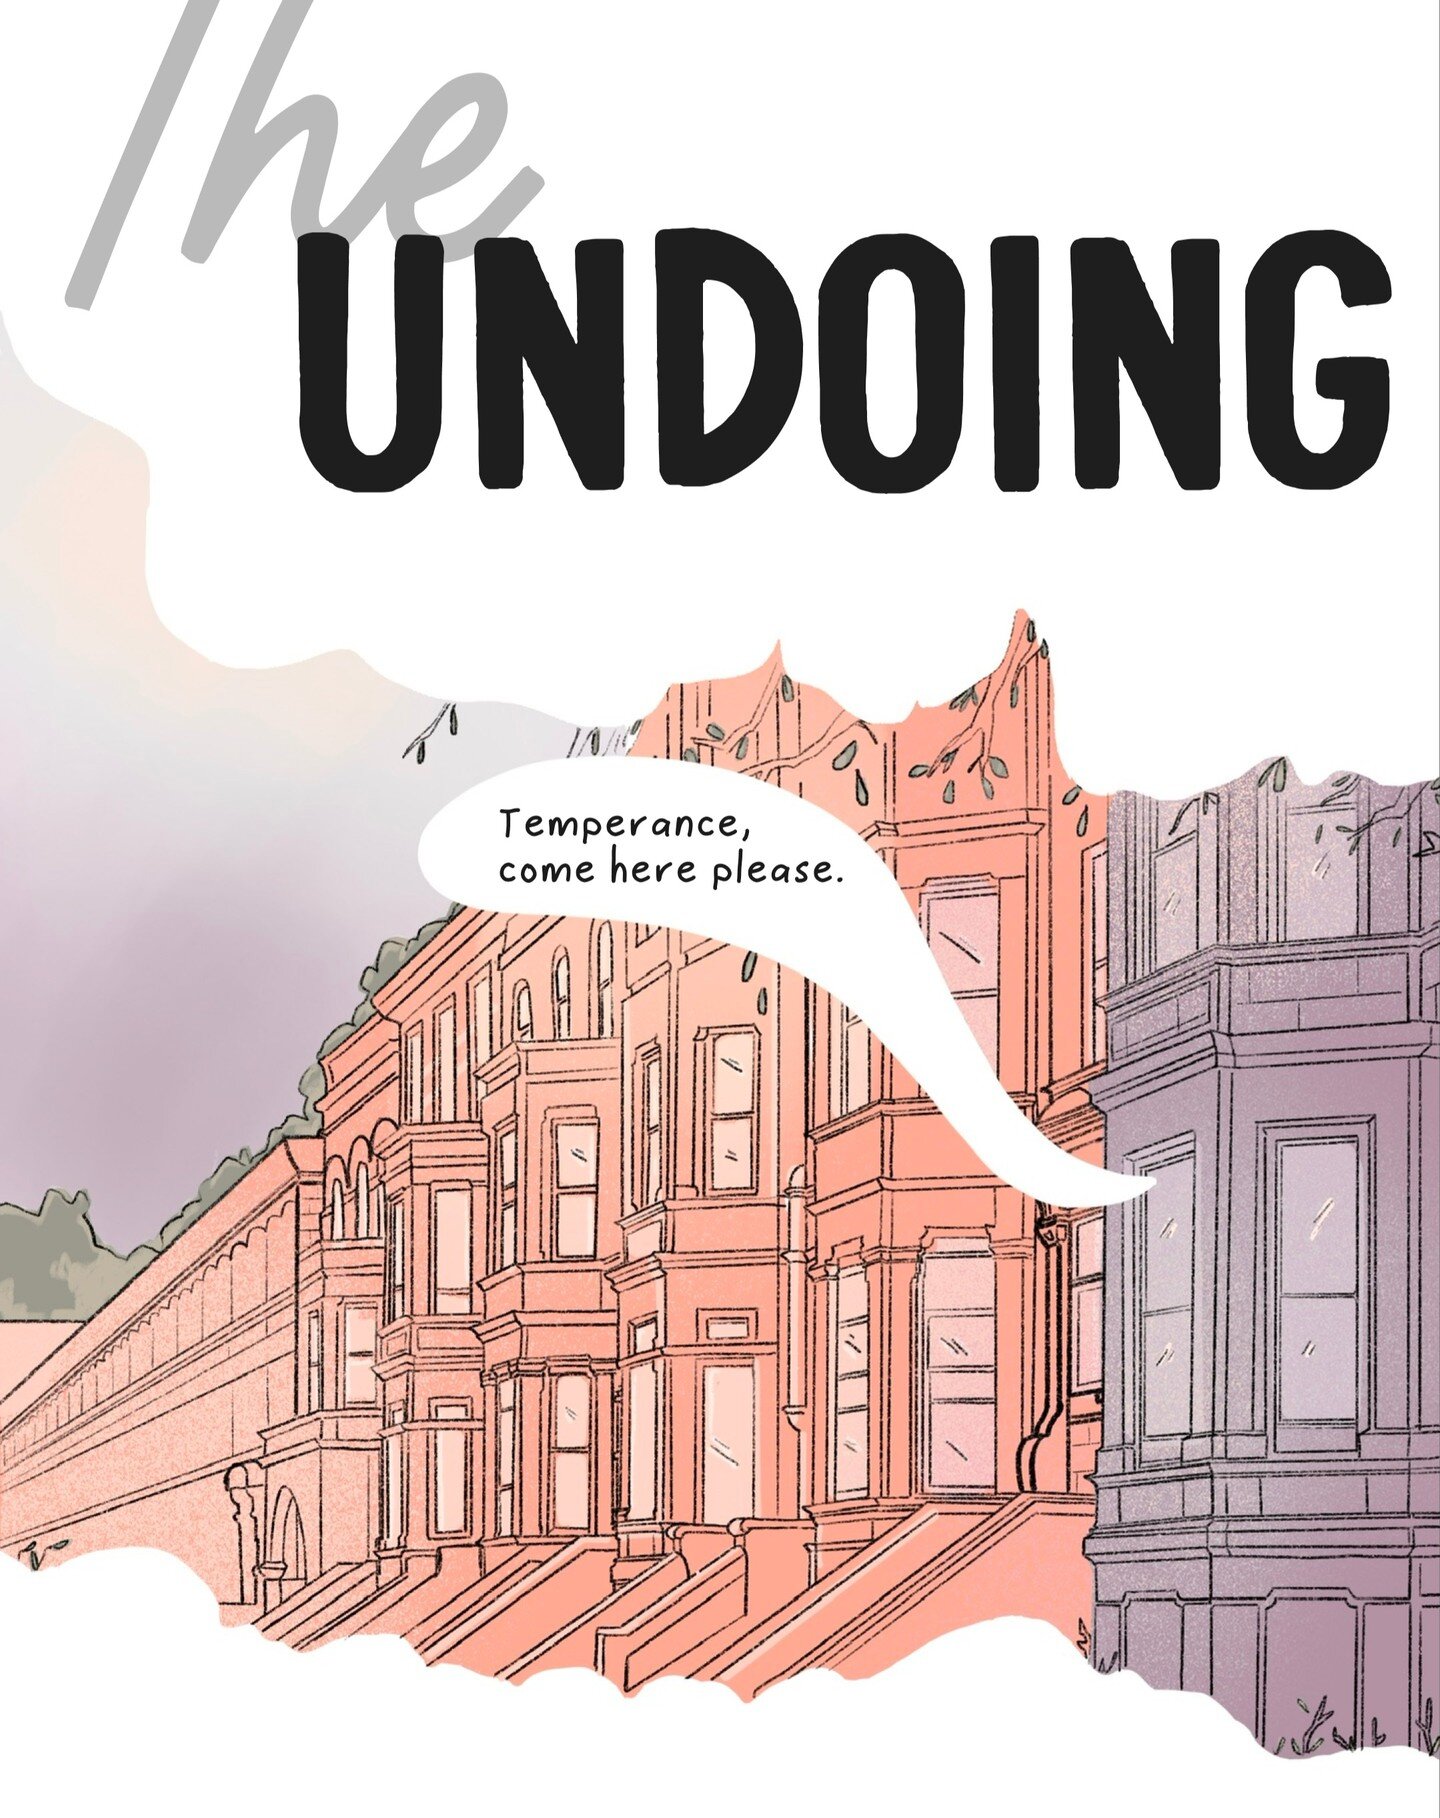 Welcome to The Undoing. This comic has been a while in the making but I'm so excited to share it with you all this year! I will post once a week both on Instagram and Substack. But if you want to see the comic in full HD (without Instagram cutting of